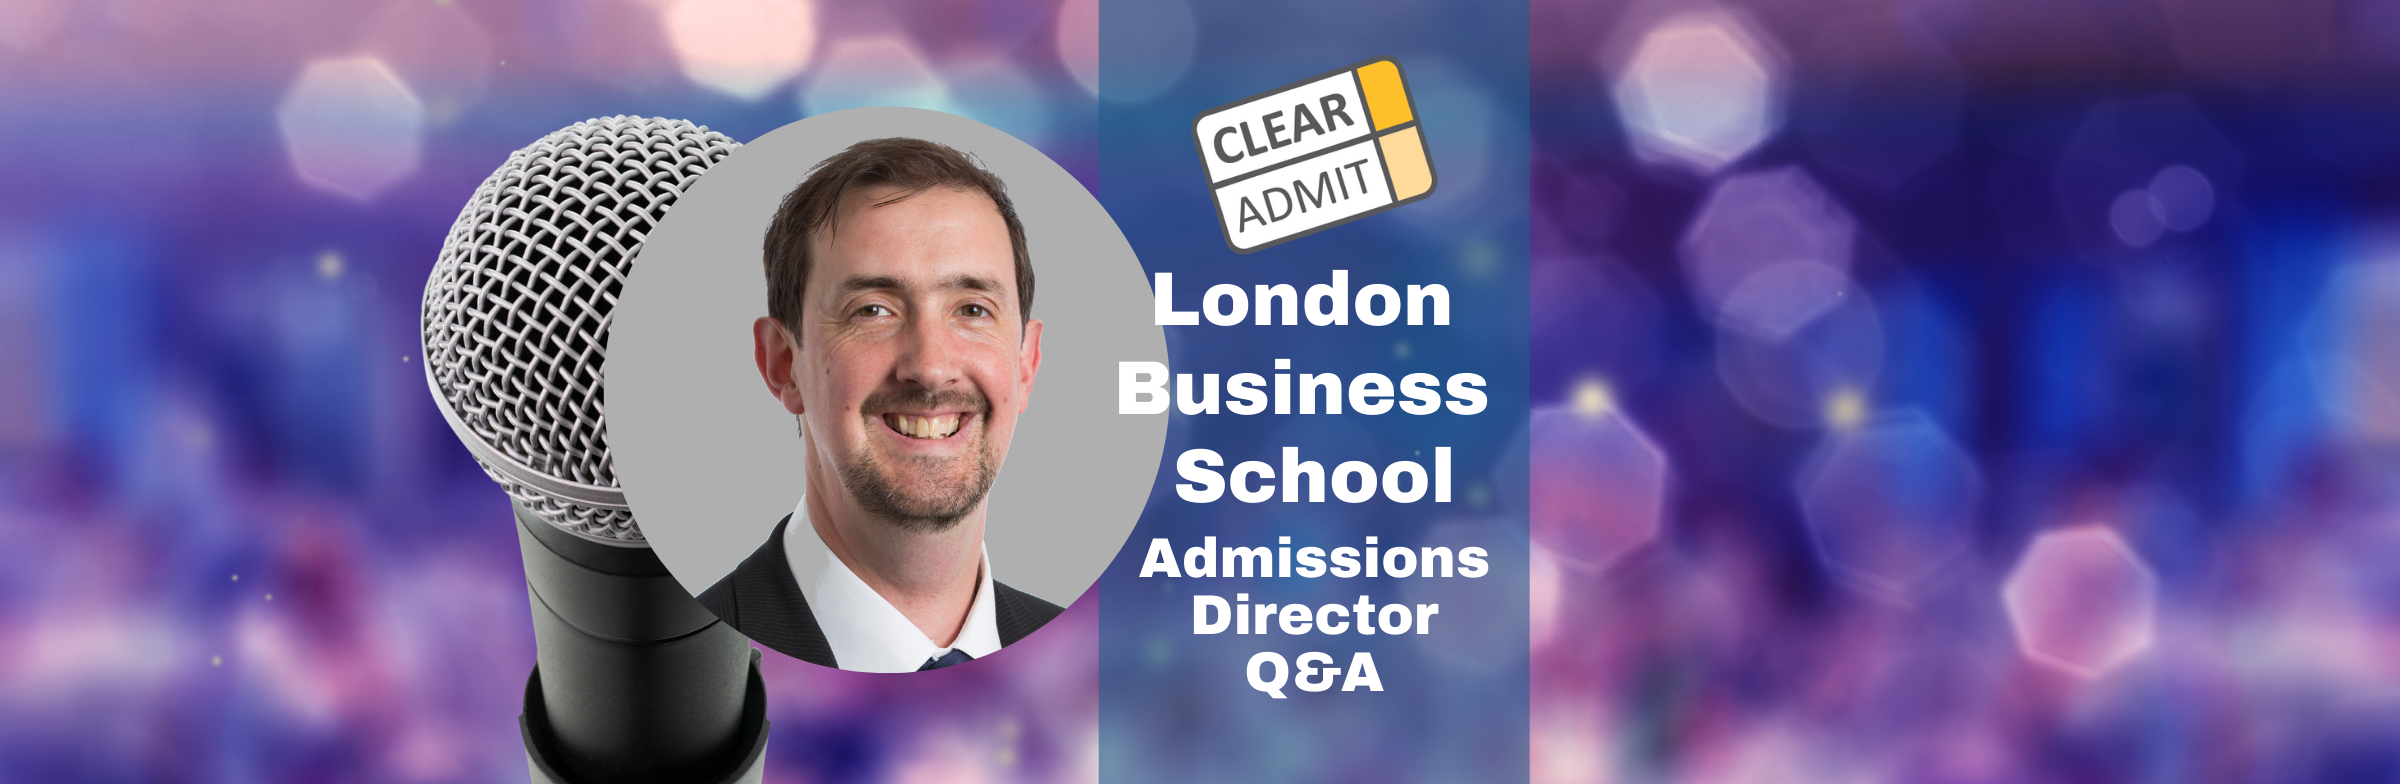 Image for Admissions Director Q&A: David Simpson of London Business School